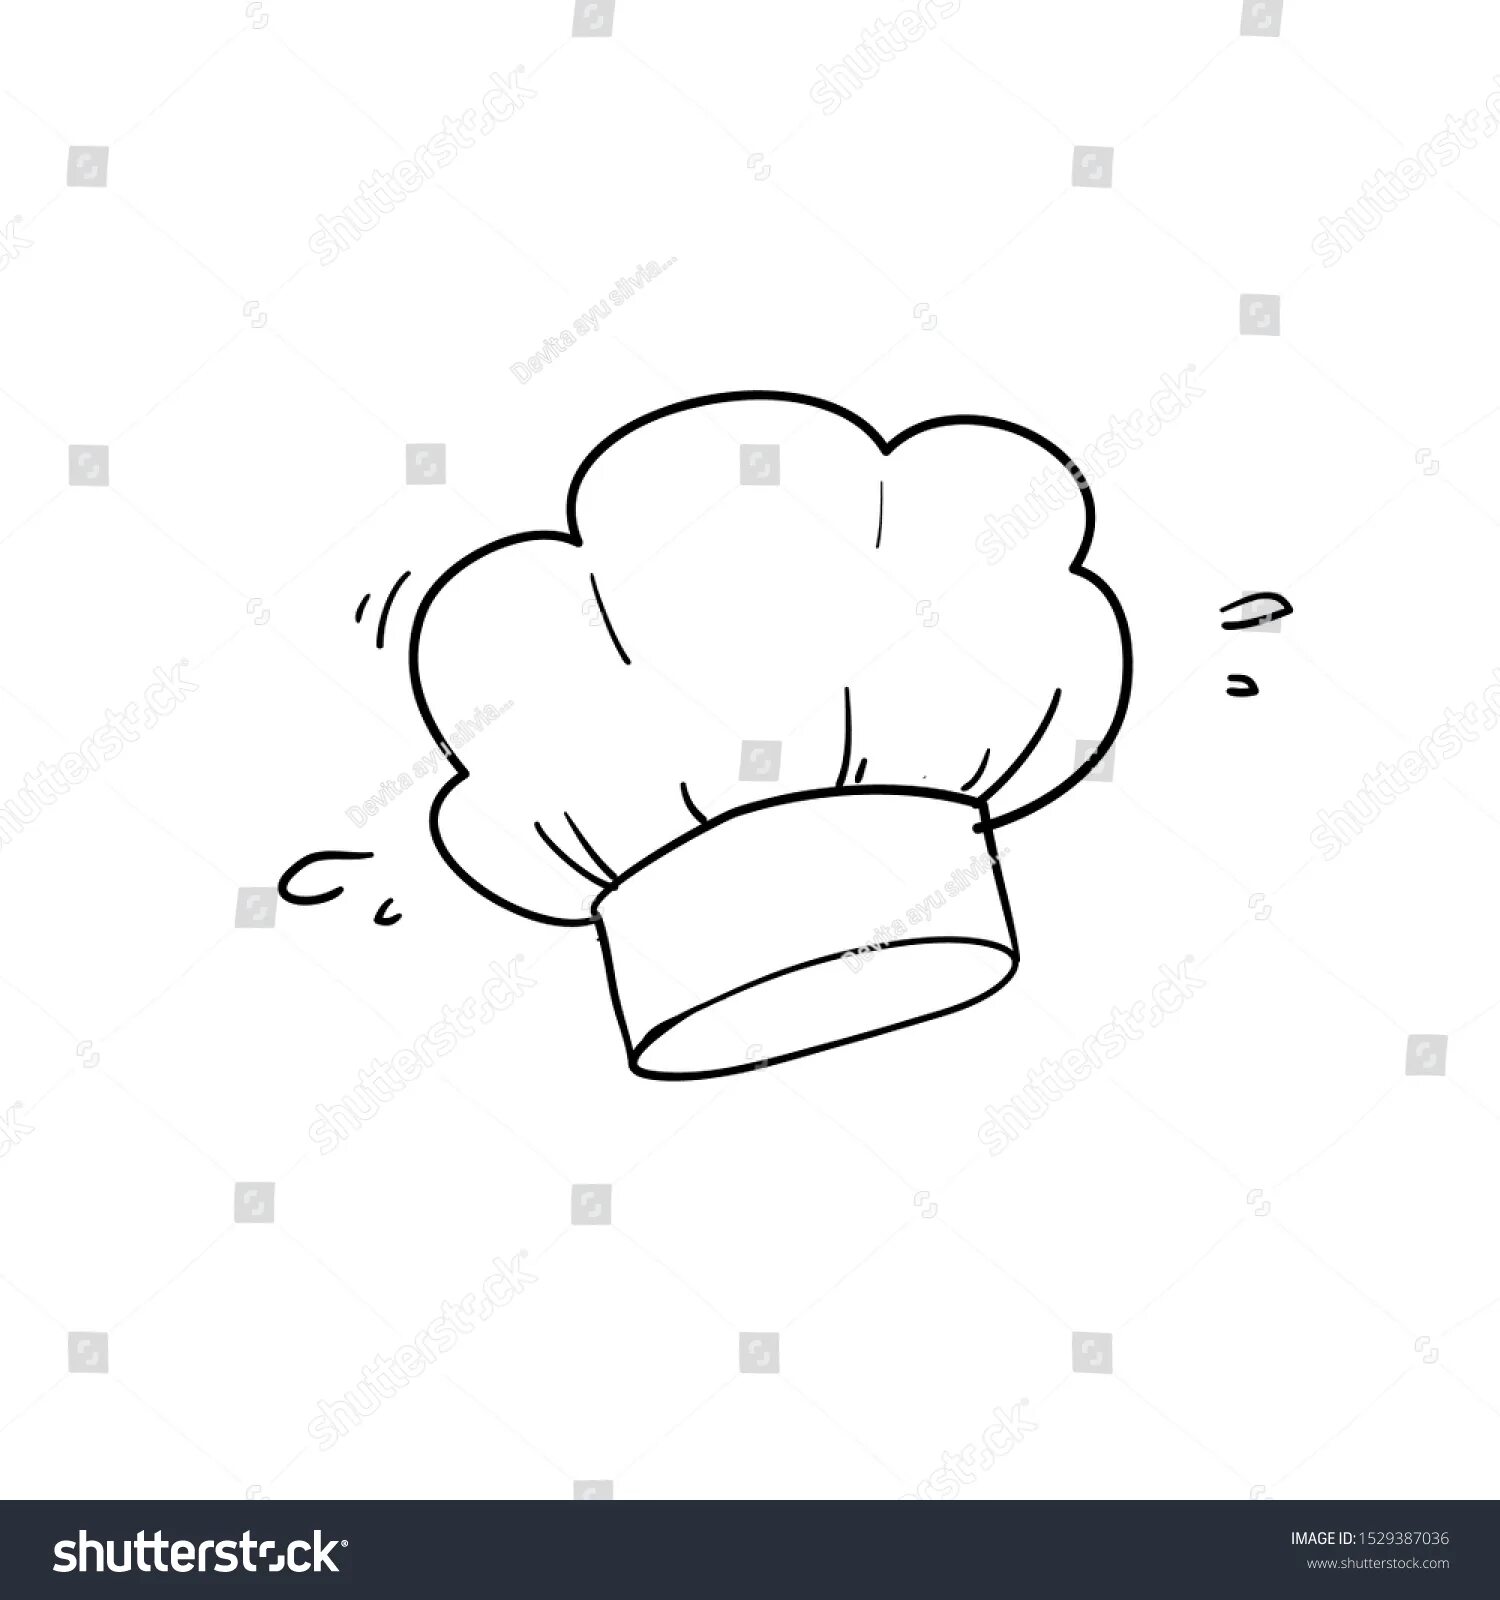 Fine chef's hat coloring page